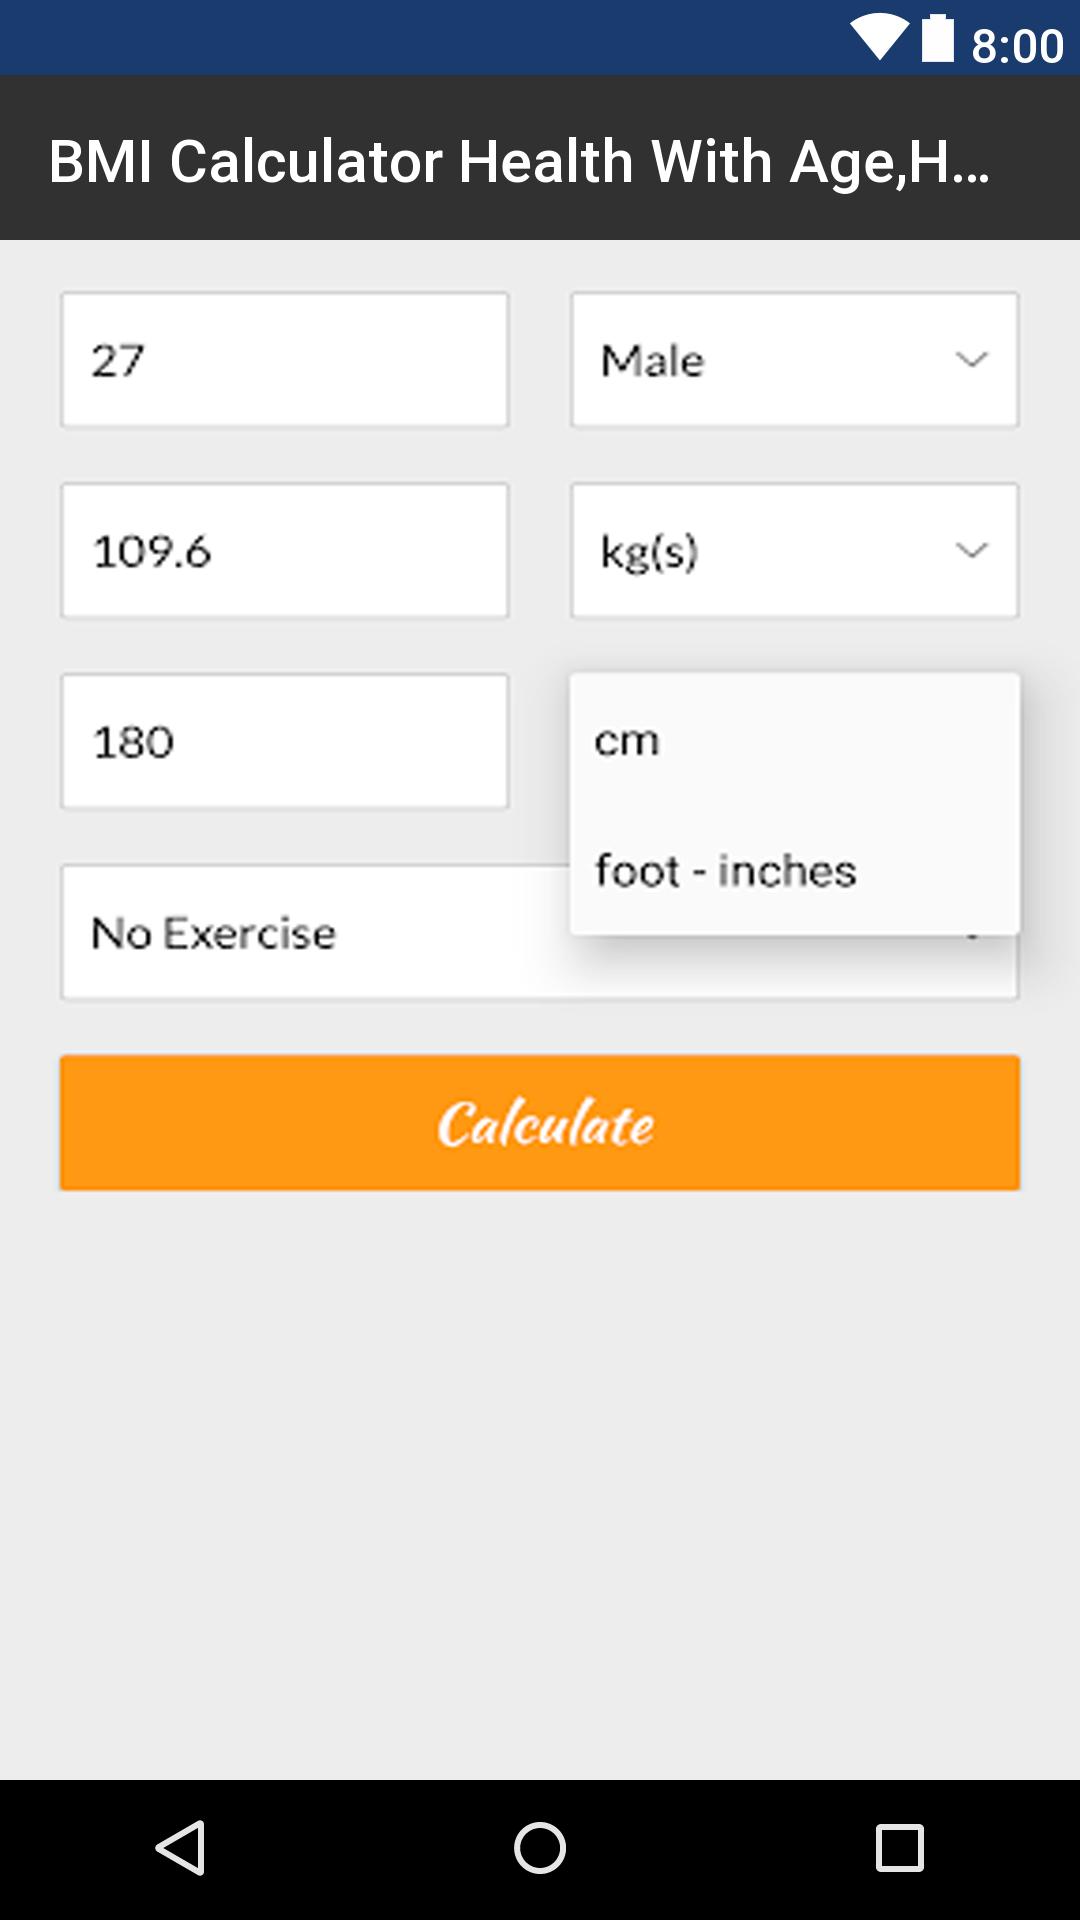 Bmi Calculator Health With Age Height For Android Apk Download